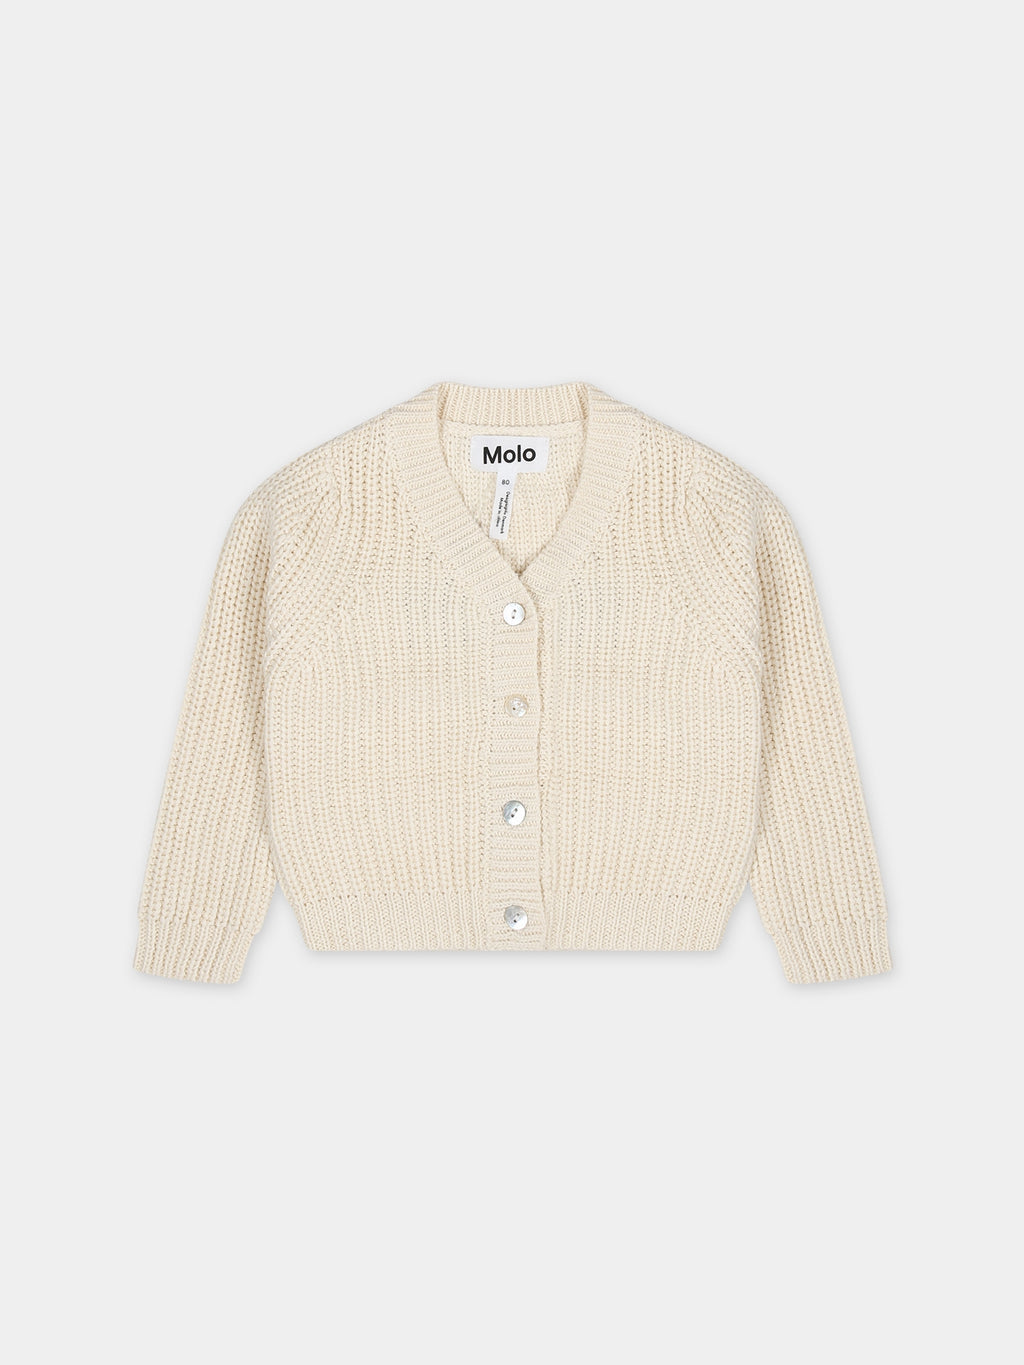 Beige cardigan for kids with logo